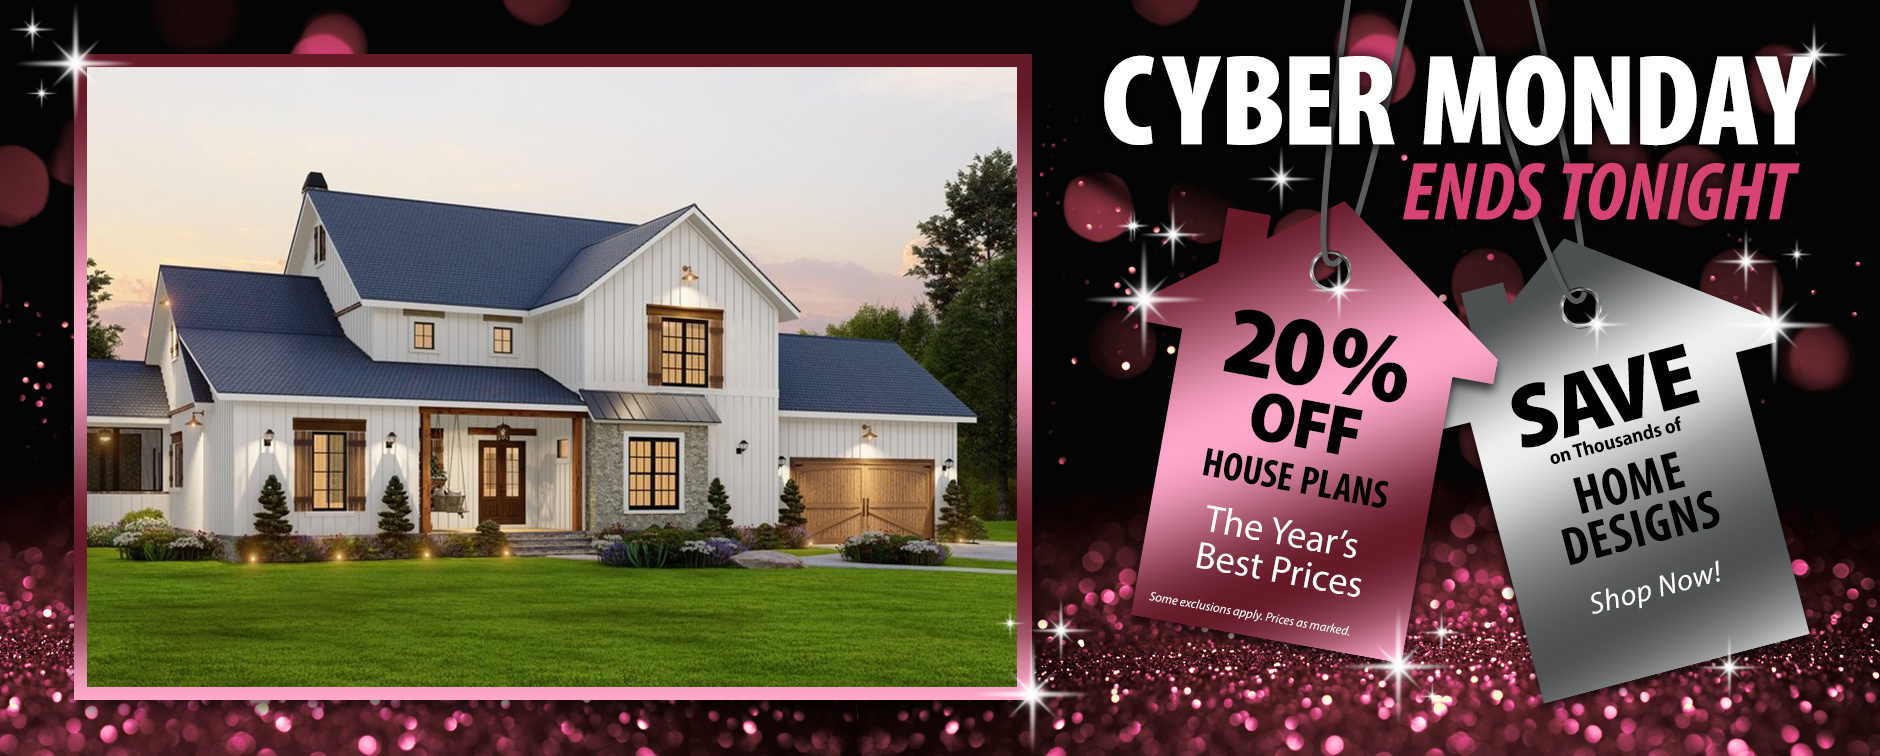 Take 20% Off Dream Home Designs - Last Day to Save